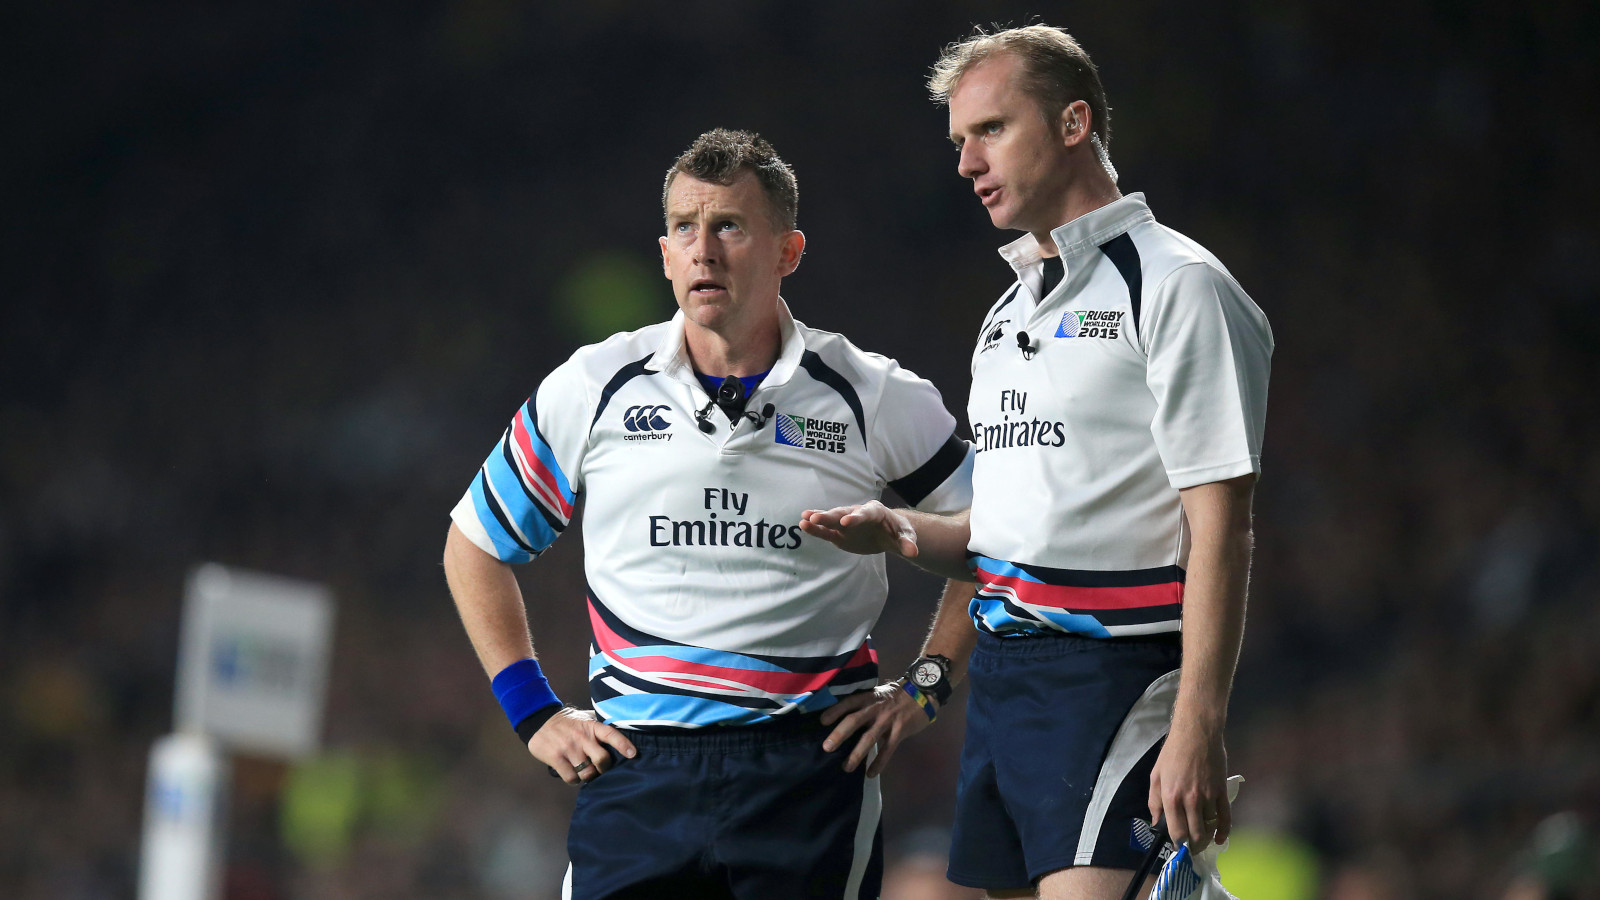 wayne barnes’ verdict on paolo garbisi’s penalty miss as nigel owens admits france got ‘very lucky’